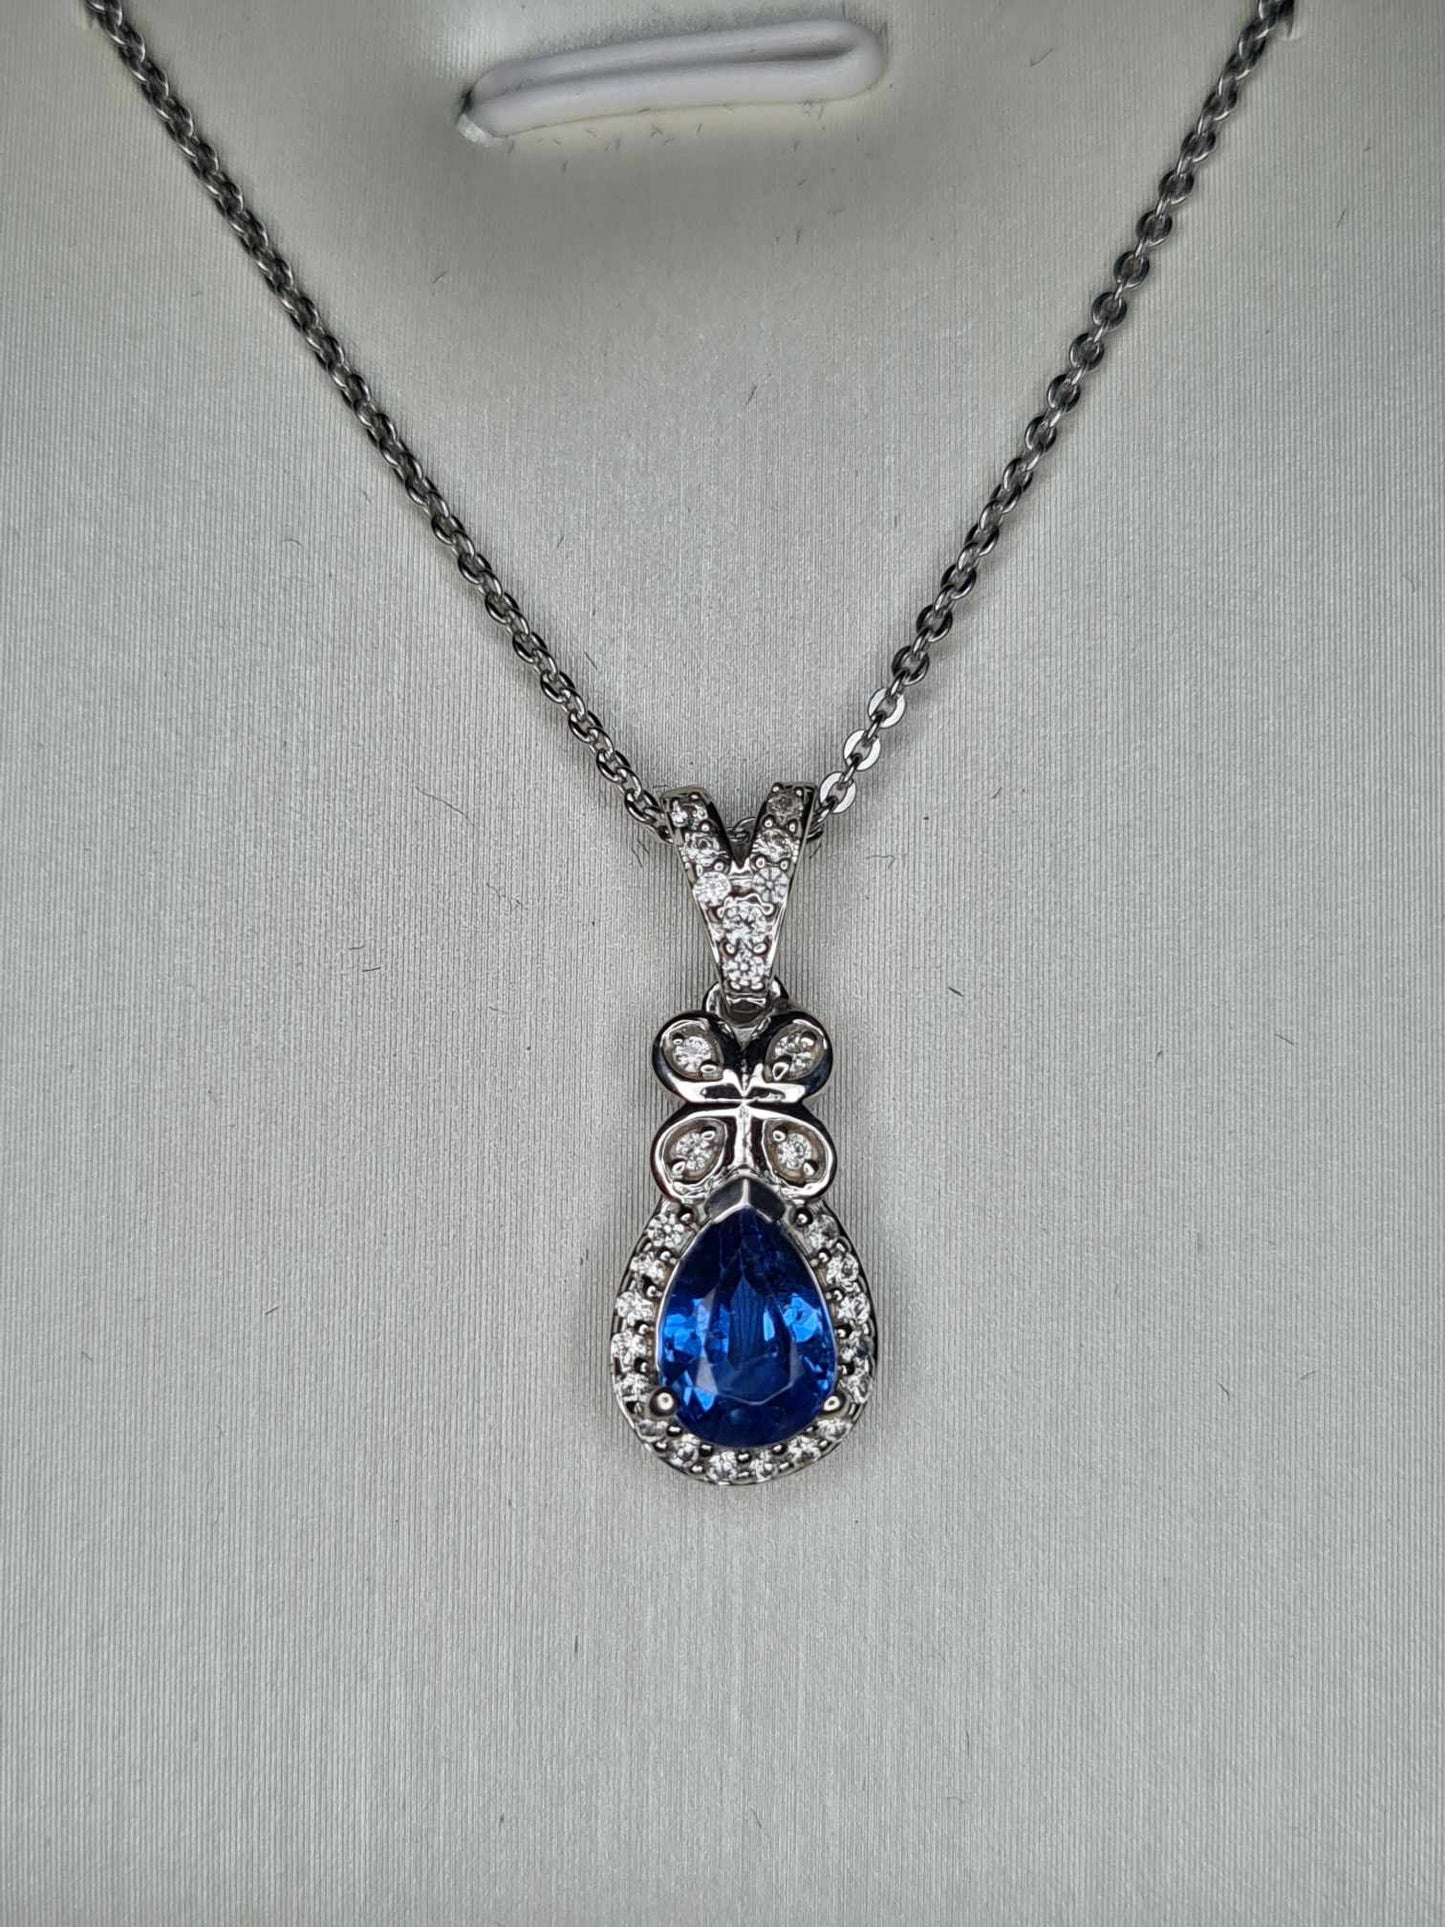 1.15ct Natural Himalayan Kyanite & Natural Zircon Necklace in Platinum Overlay 925 Sterling Silver